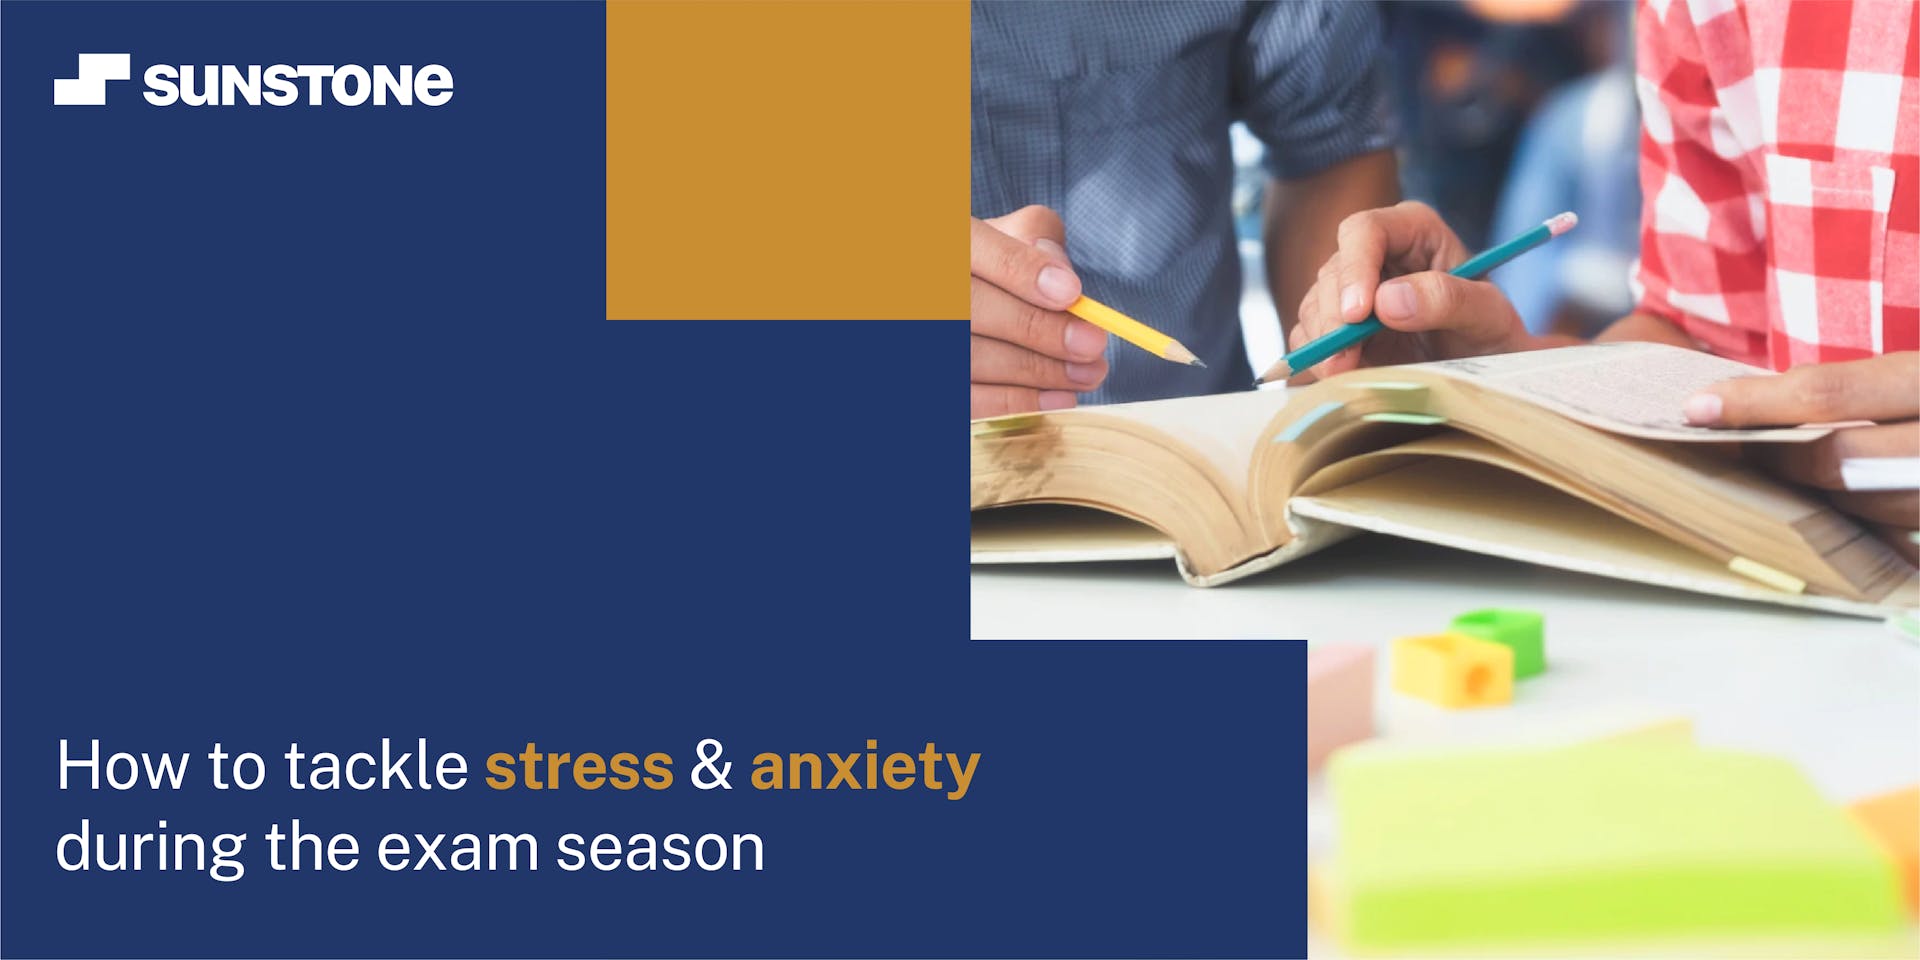 How to tackle stress and anxiety during the exam season